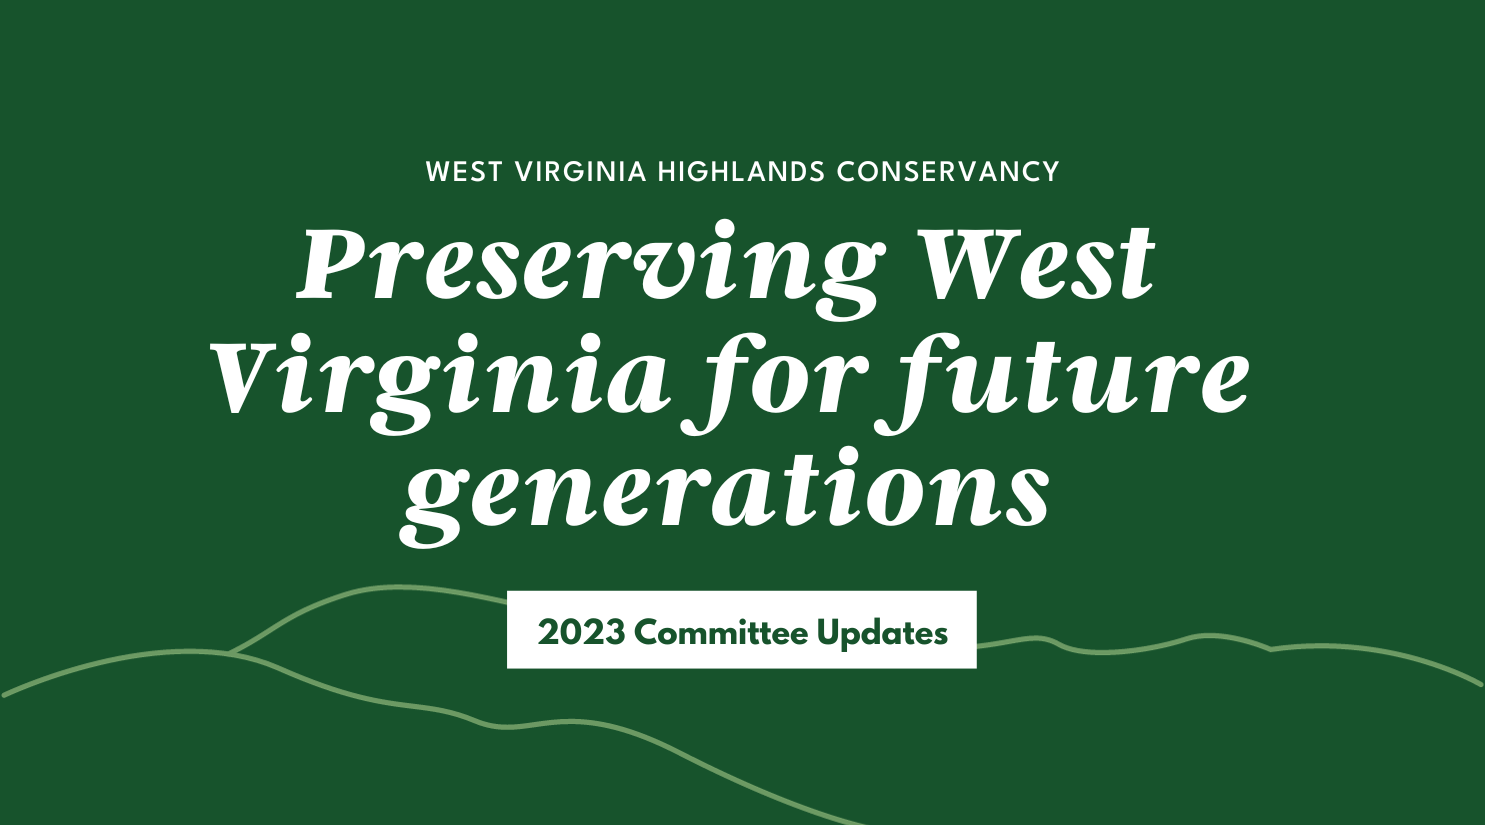 West Virginia Highlands Conservancy Preserving West Virginia for future generations 2023 Committee Updates